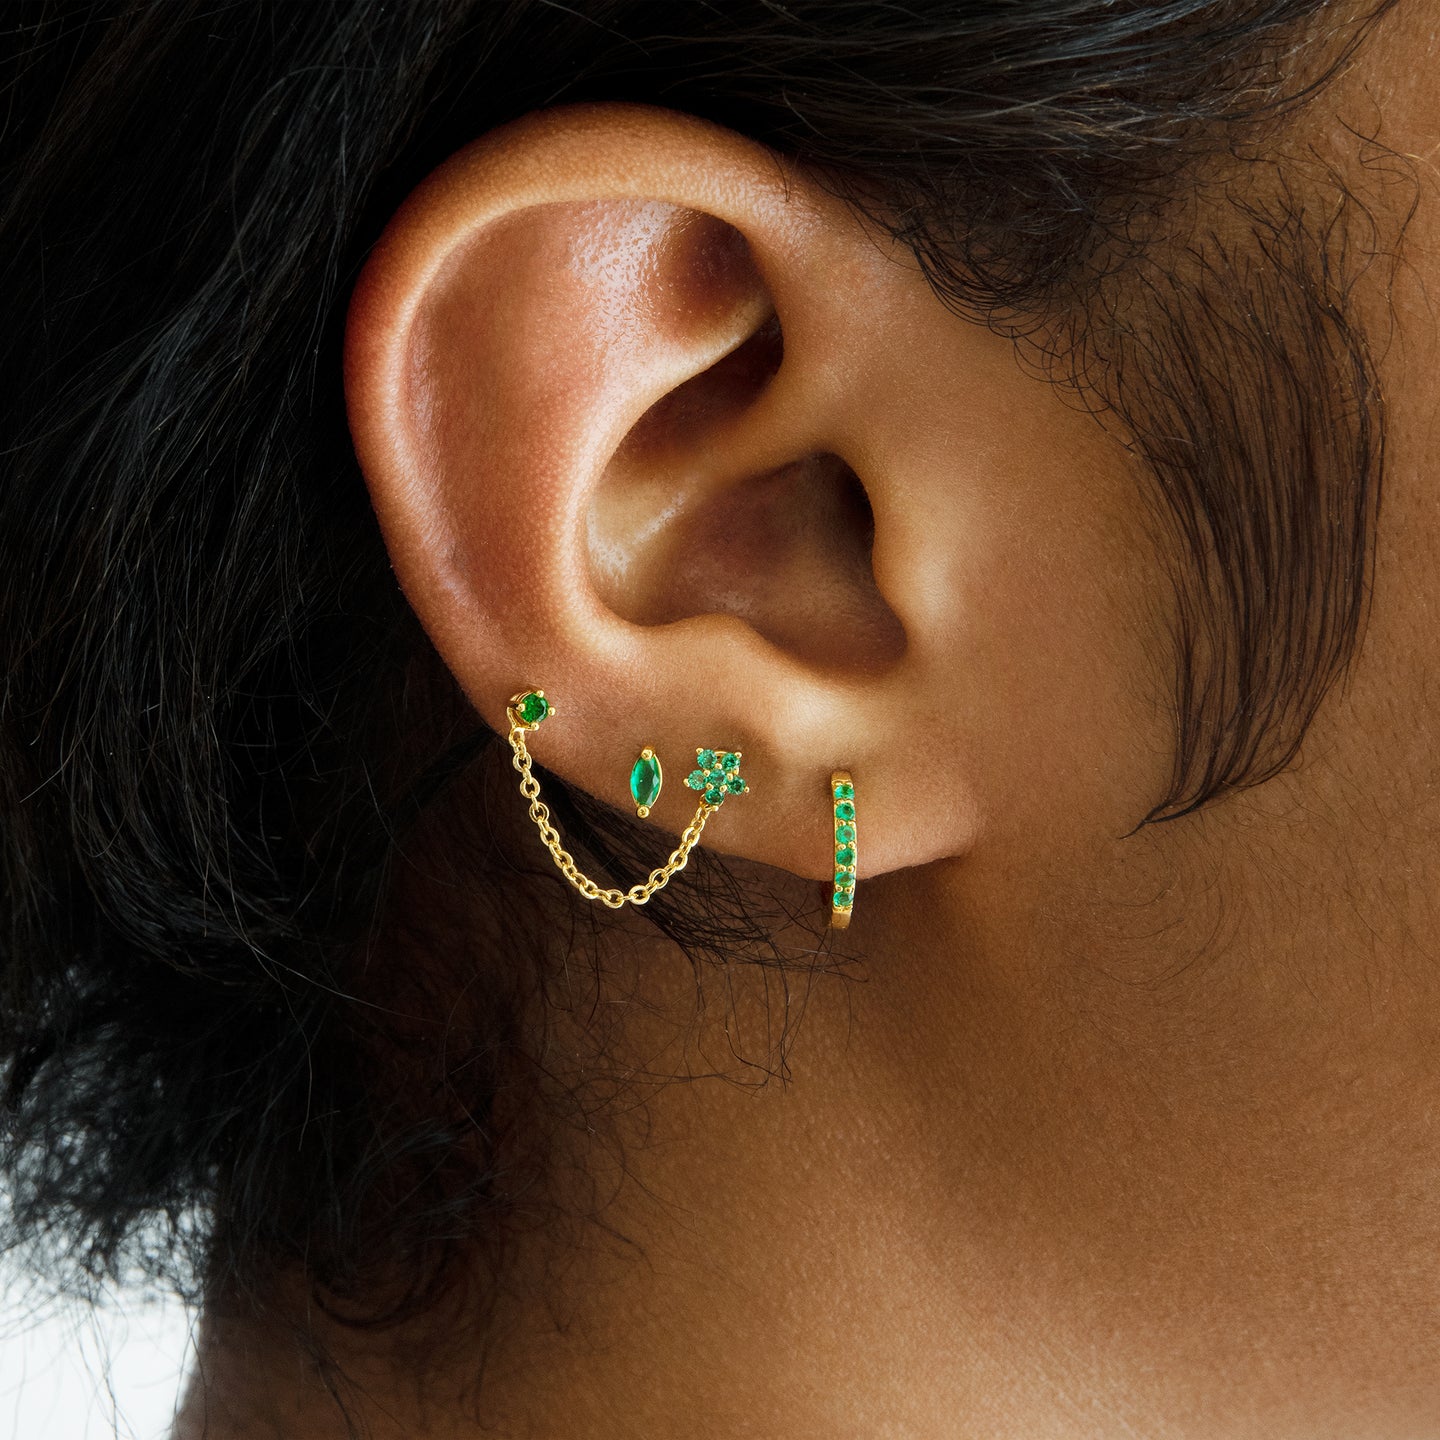 The marquise mini stud features a green oblong shaped gem and has gold accents. [hover] color:null|gold/green